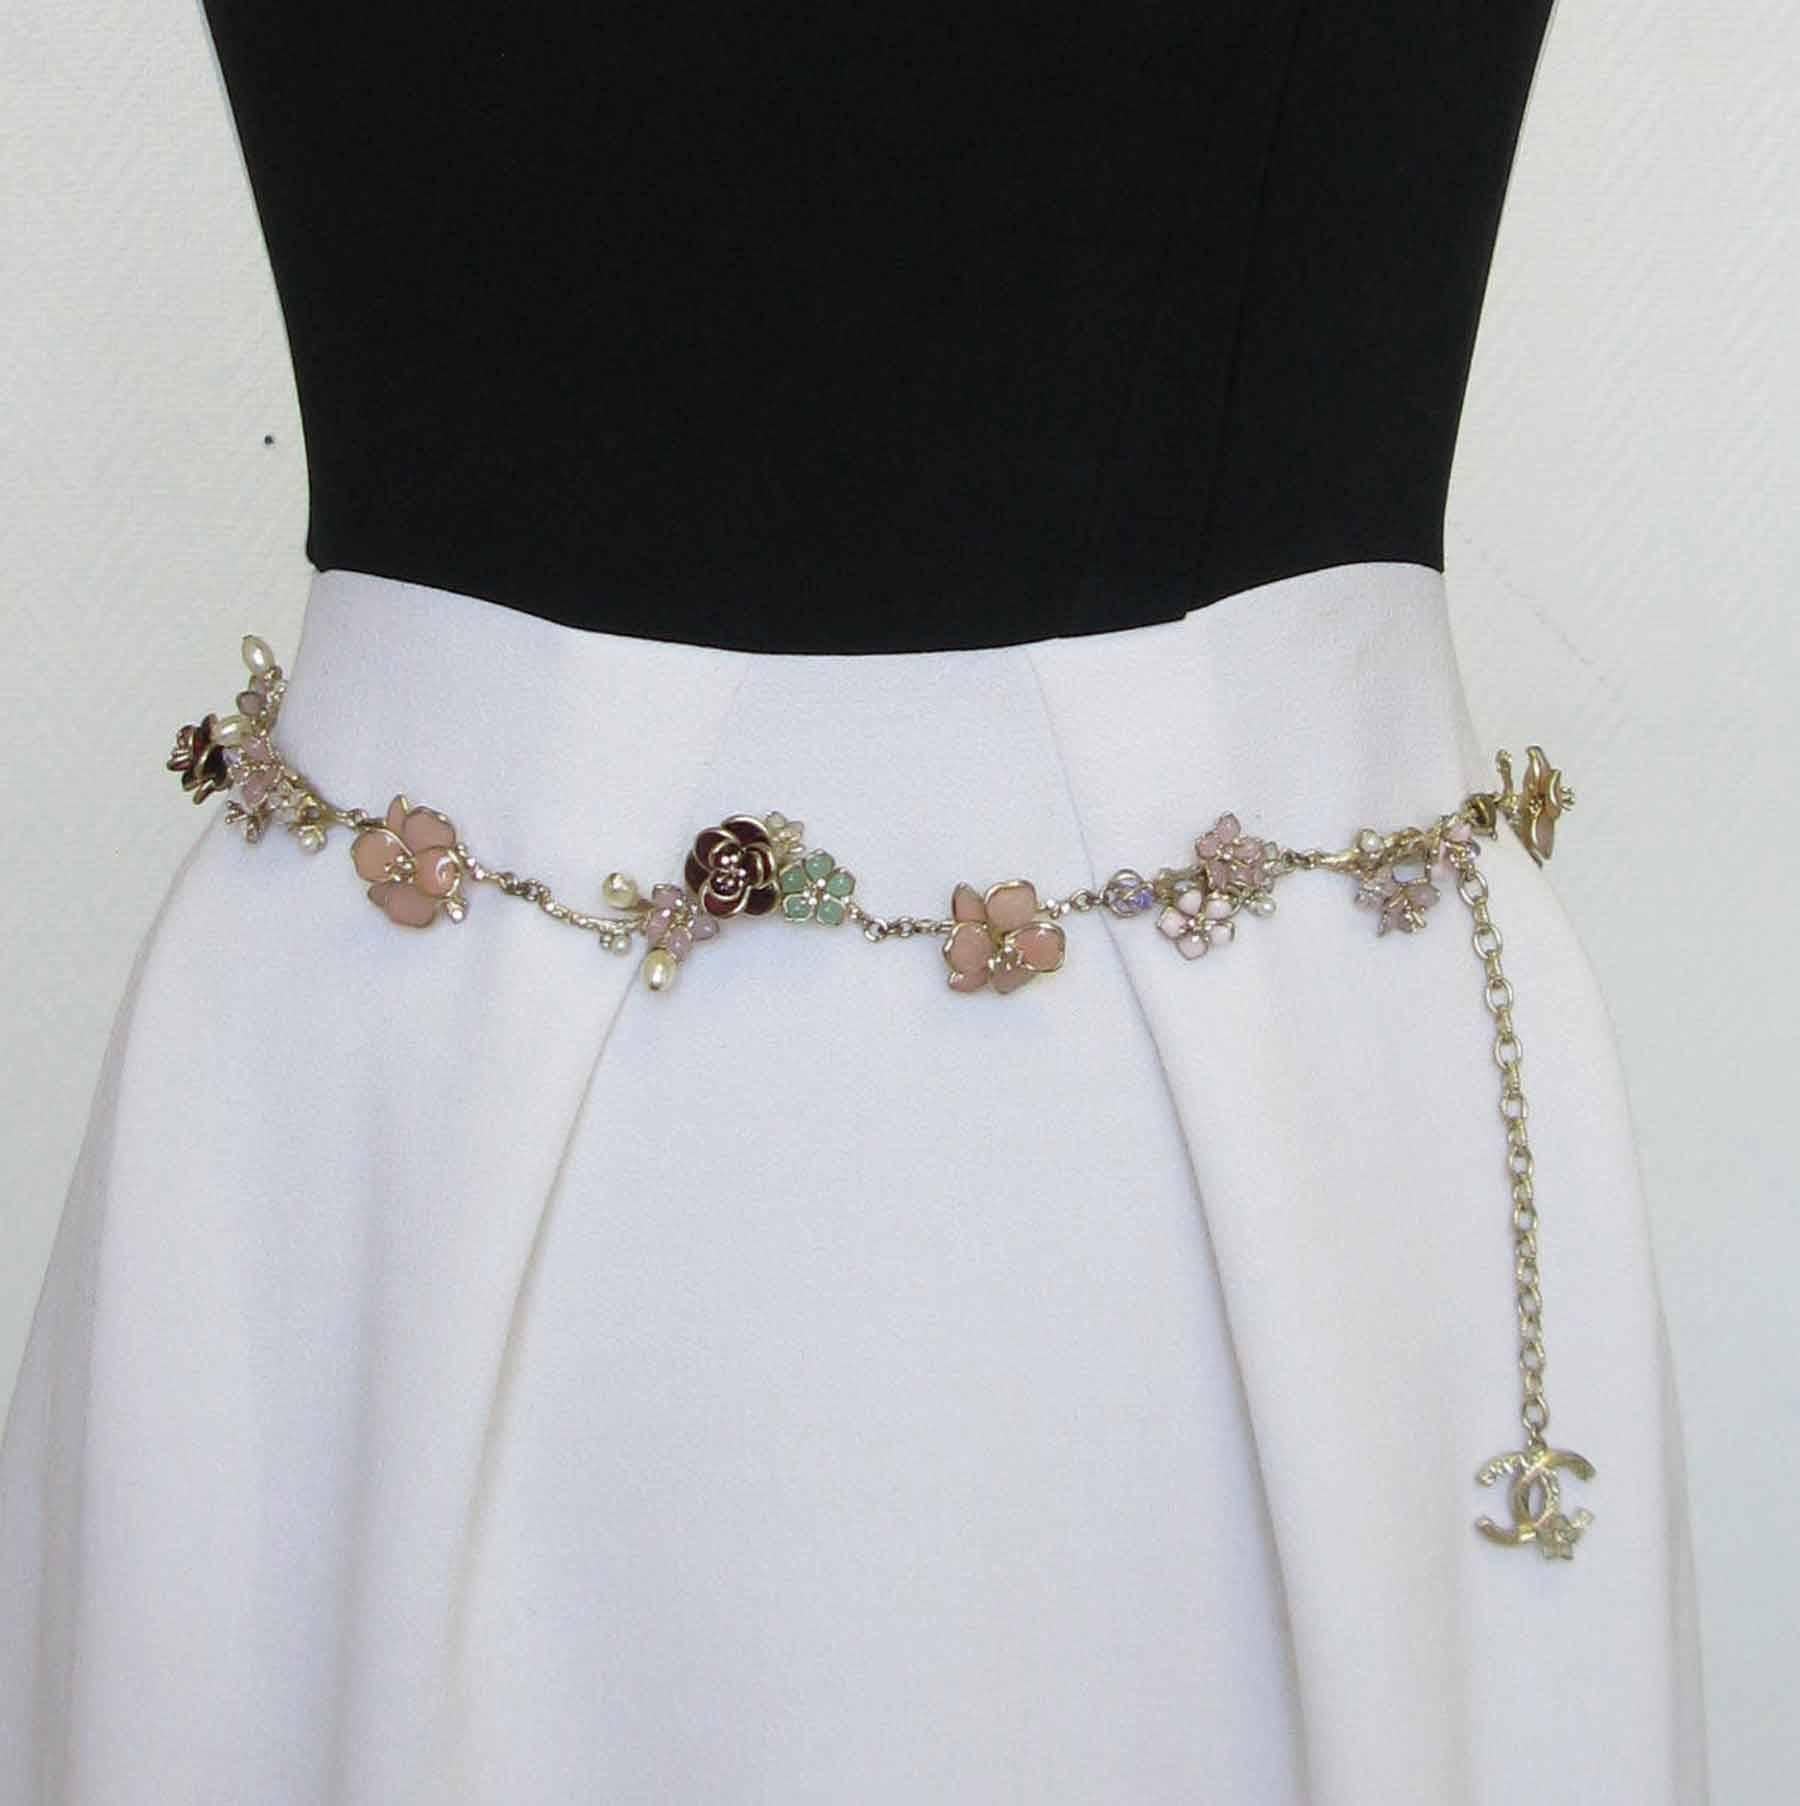 Sublime belt-necklace Chanel stitching in gilded metal pale gold color, flower petals in molten glass of various colors: pink, burgundy, green, mauve. Pearls oval and shiny. 
A beautiful CC set with brilliants and a small flower completes the chain